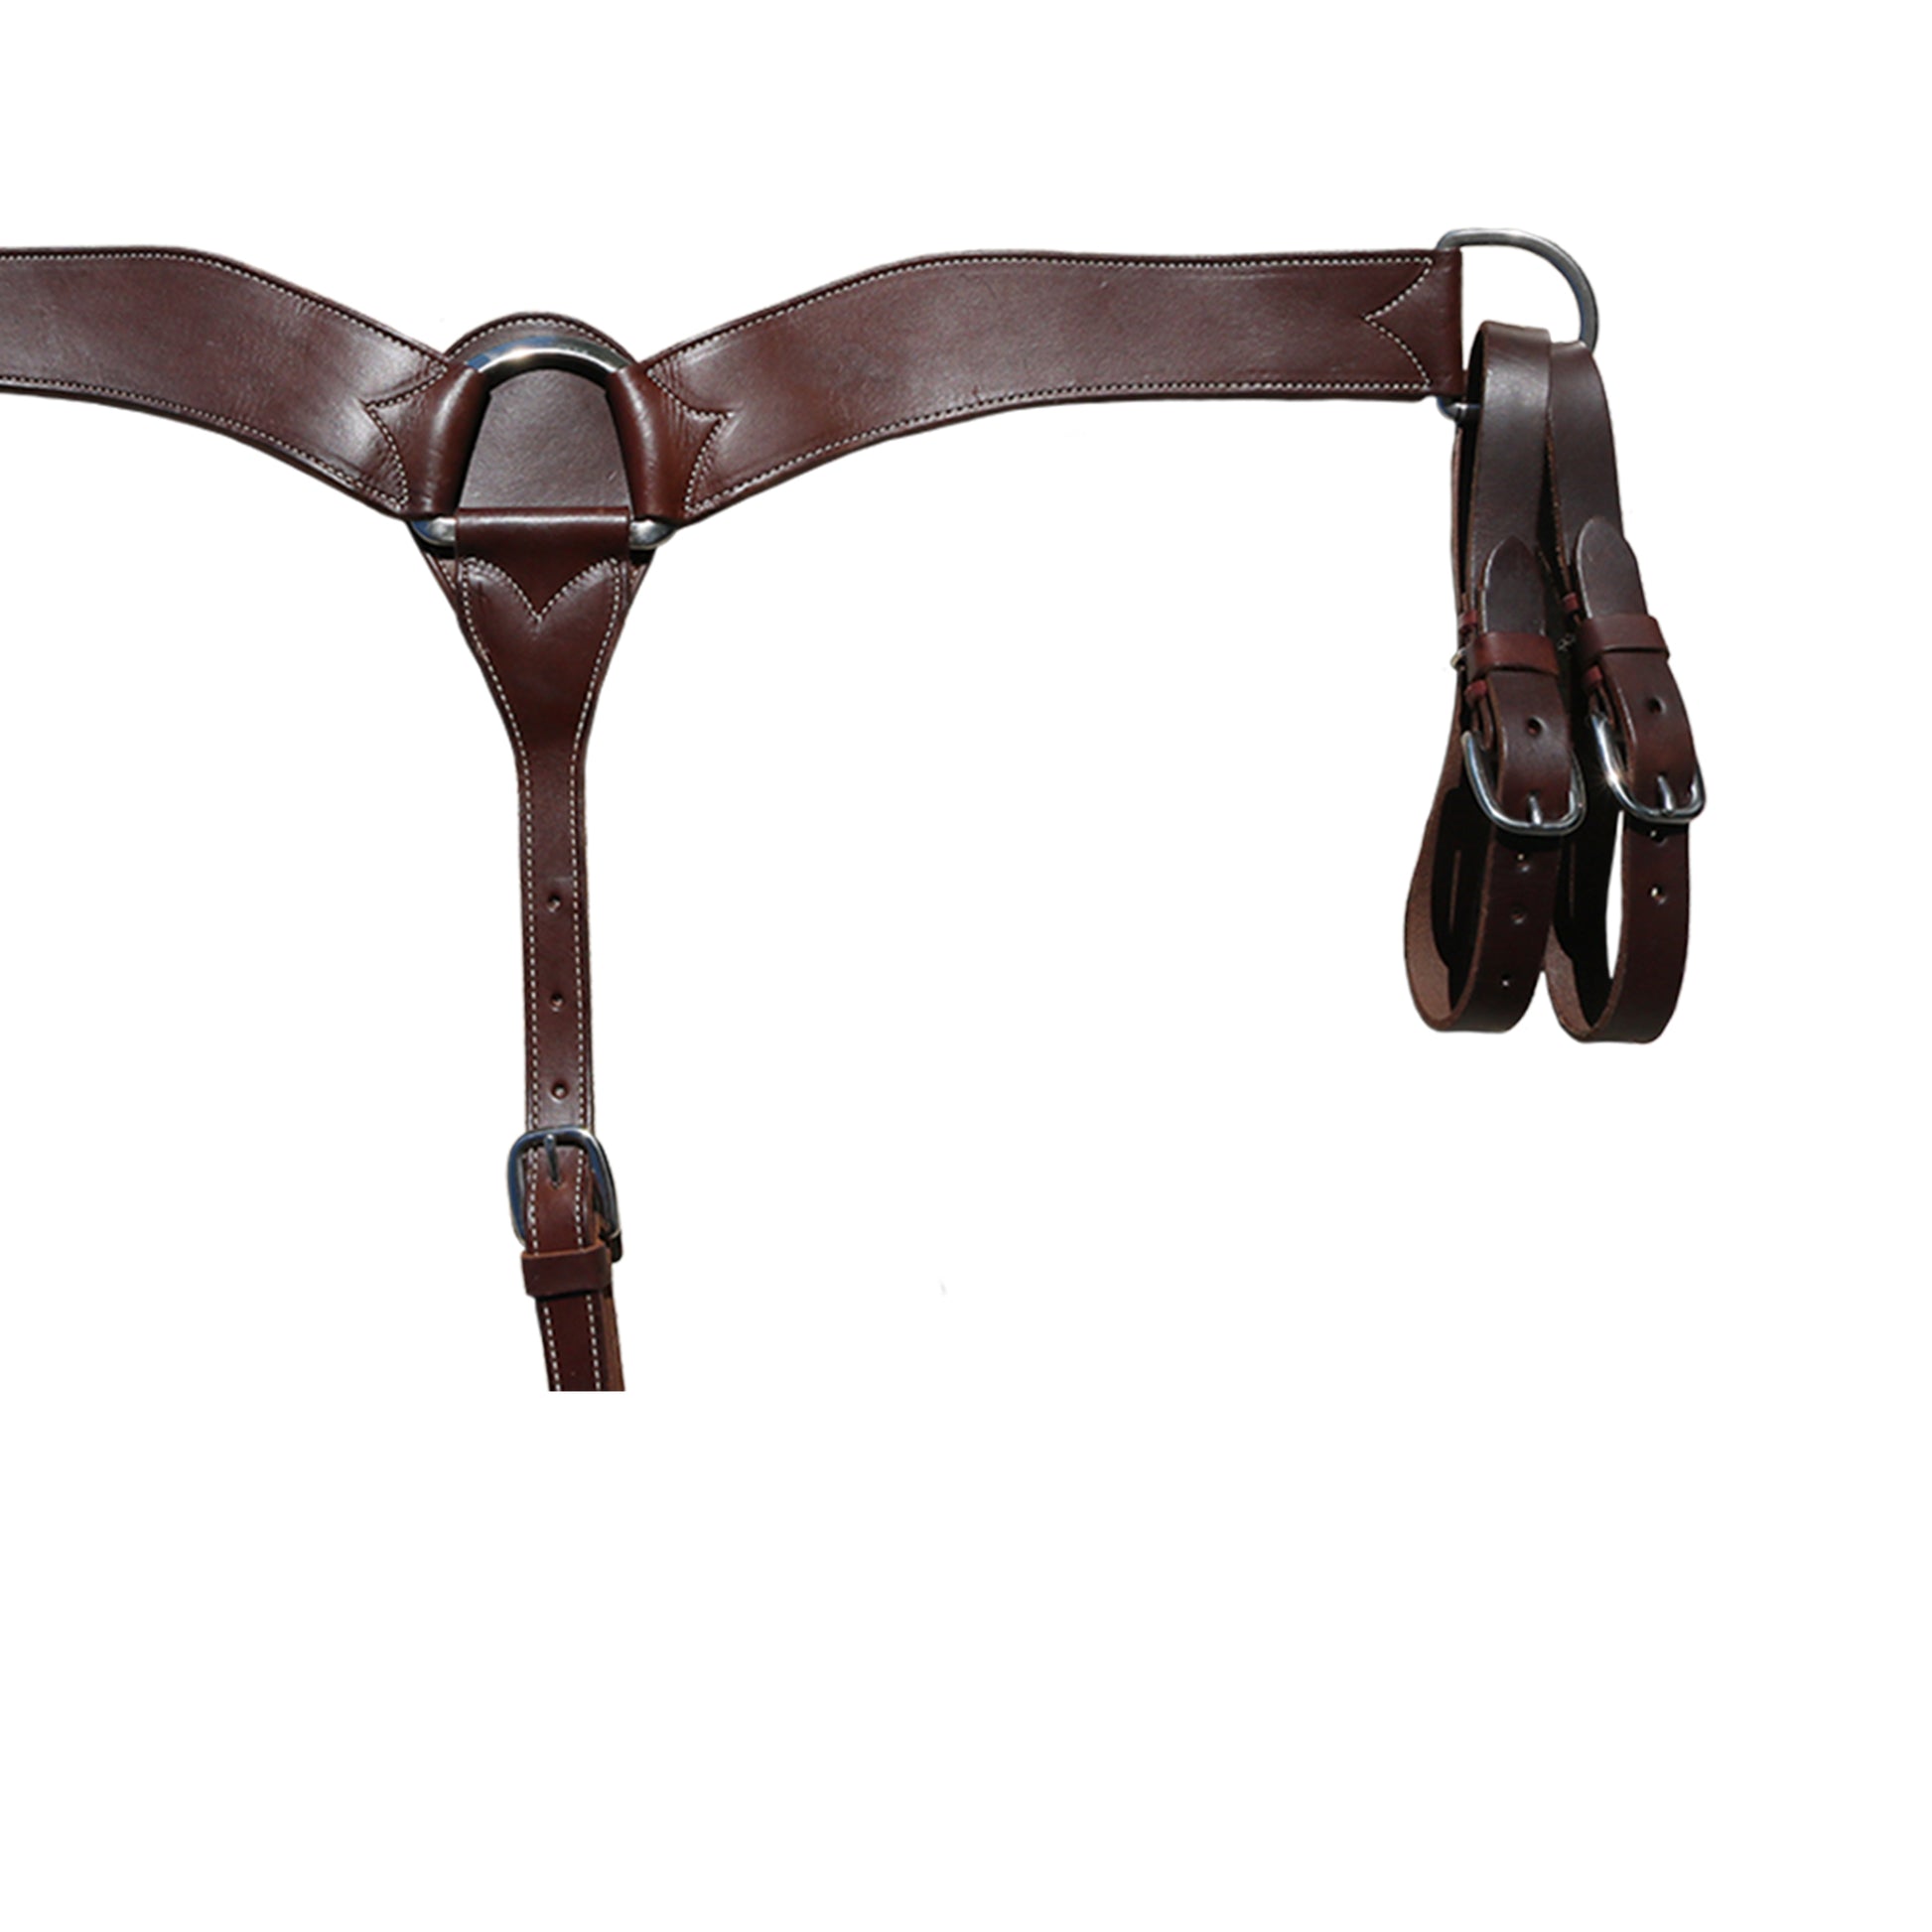 2-3/4" Elite breast collar chocolate leather with double tugs.